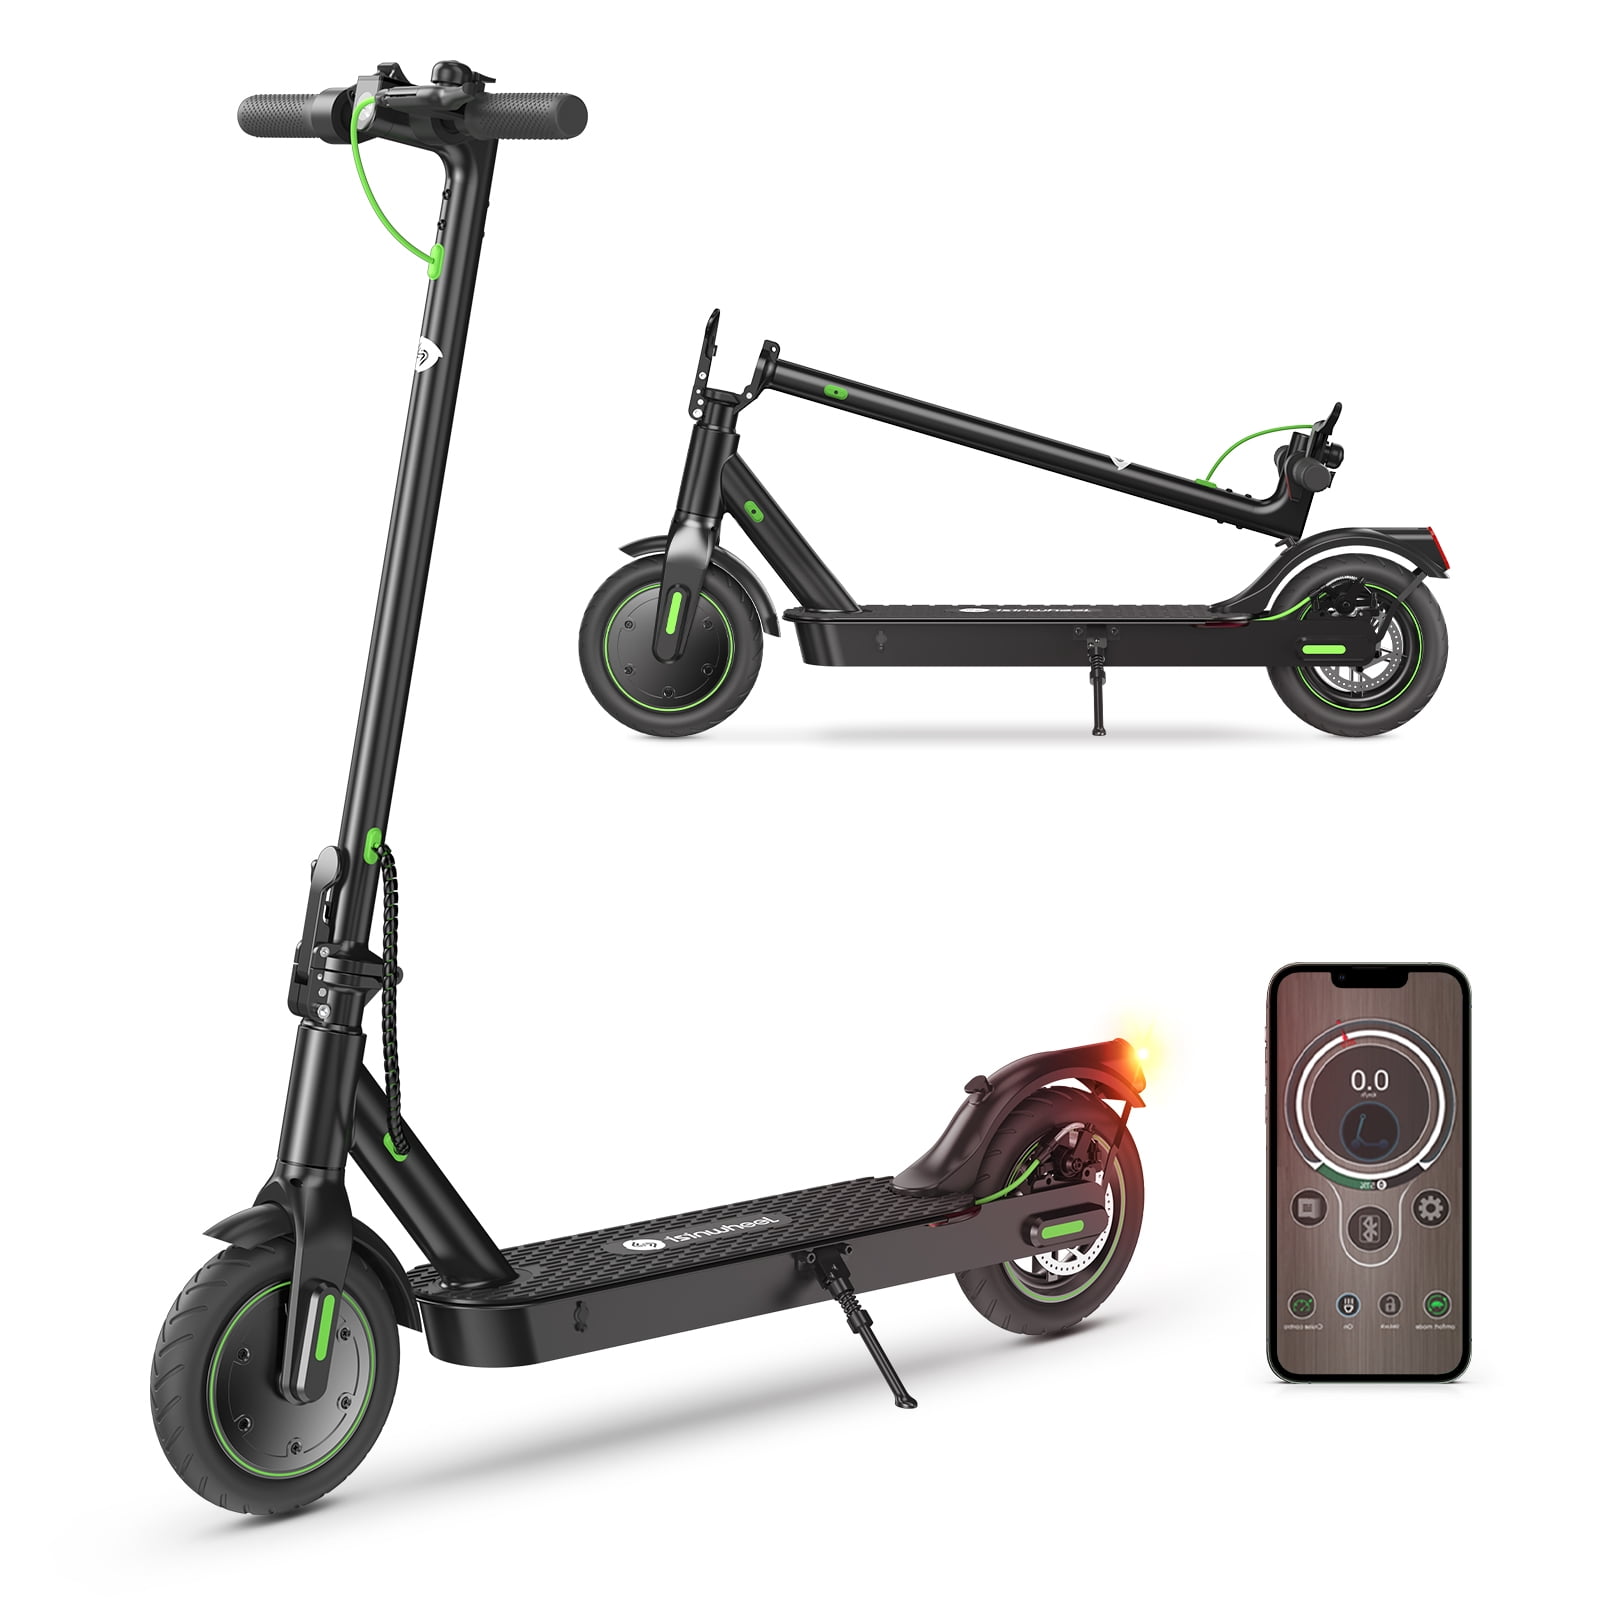 isinwheel S9Pro Electric Scooter, 350W Motor, Long Range 17Miles, Top Speed Up to 18.6MPH E Scooter, App Control, 8.5-Inch Honeycomb Tires, 7.5Ah